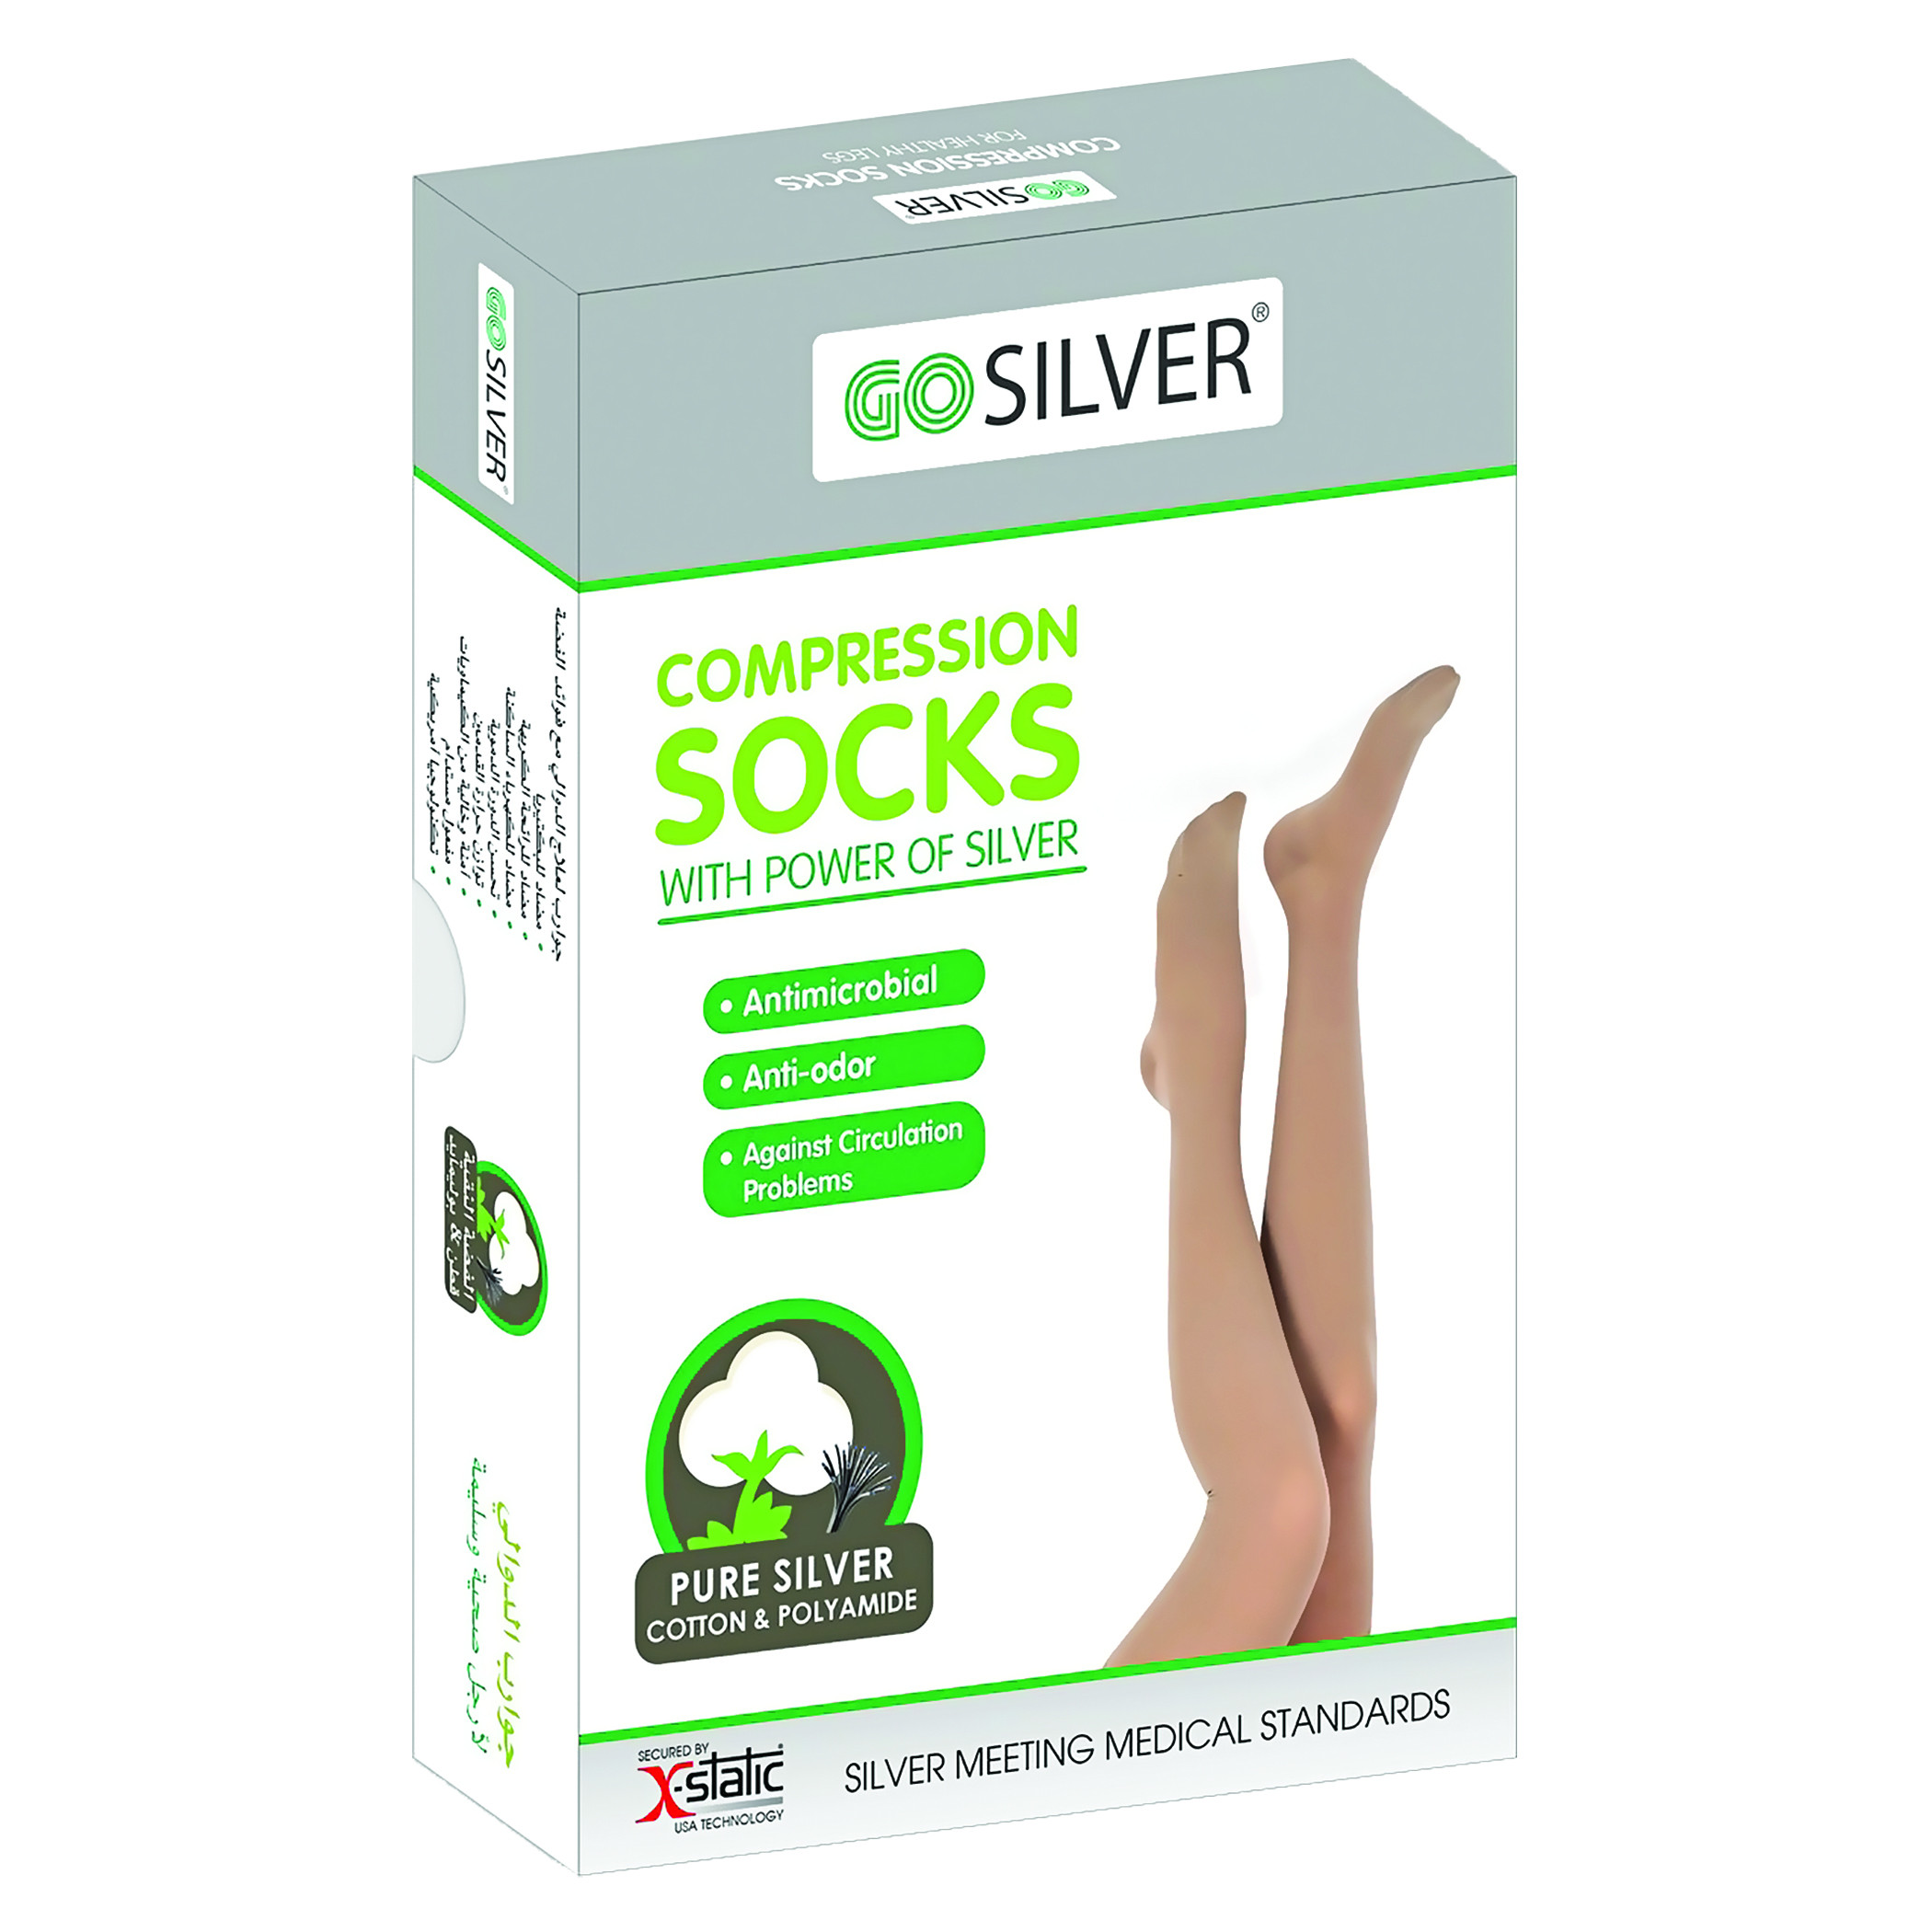 Go Silver Over Knee High, Compression Socks,Class 1 (18-21 mmHG) Closed Toe with Silicon Flesh Size 5